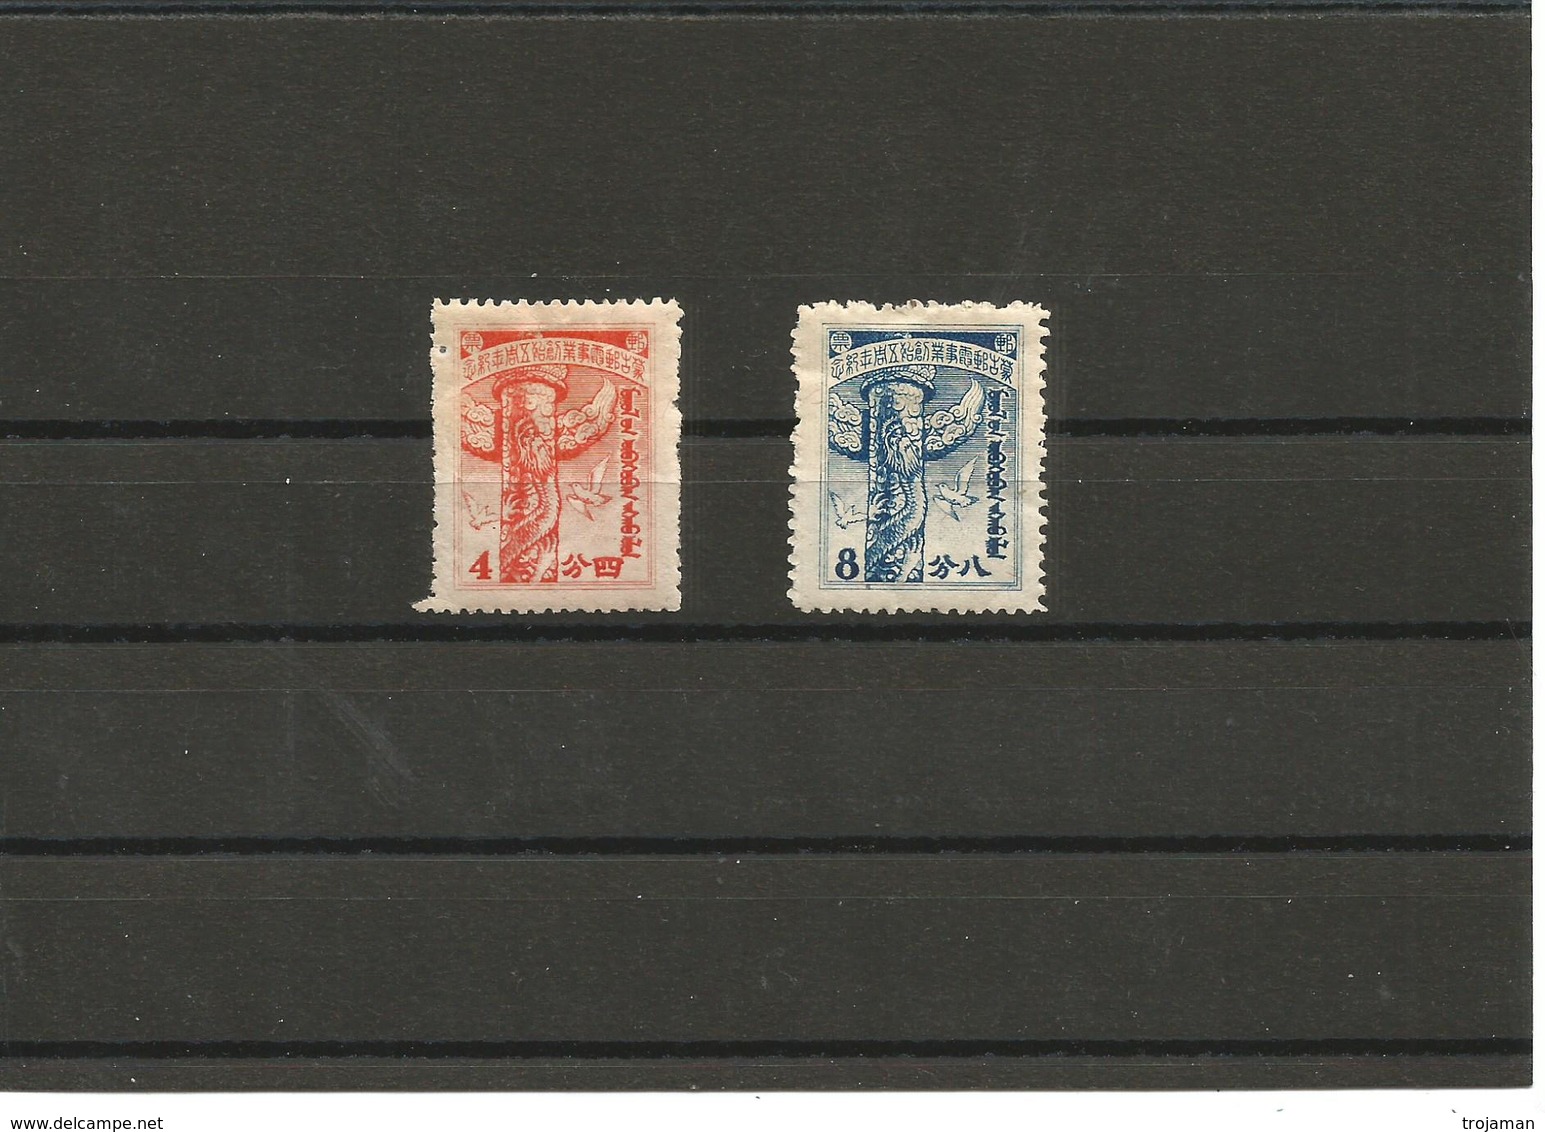 EX-M-20-04-39   2 MINT STAMPS MH**. - Nordchina 1949-50